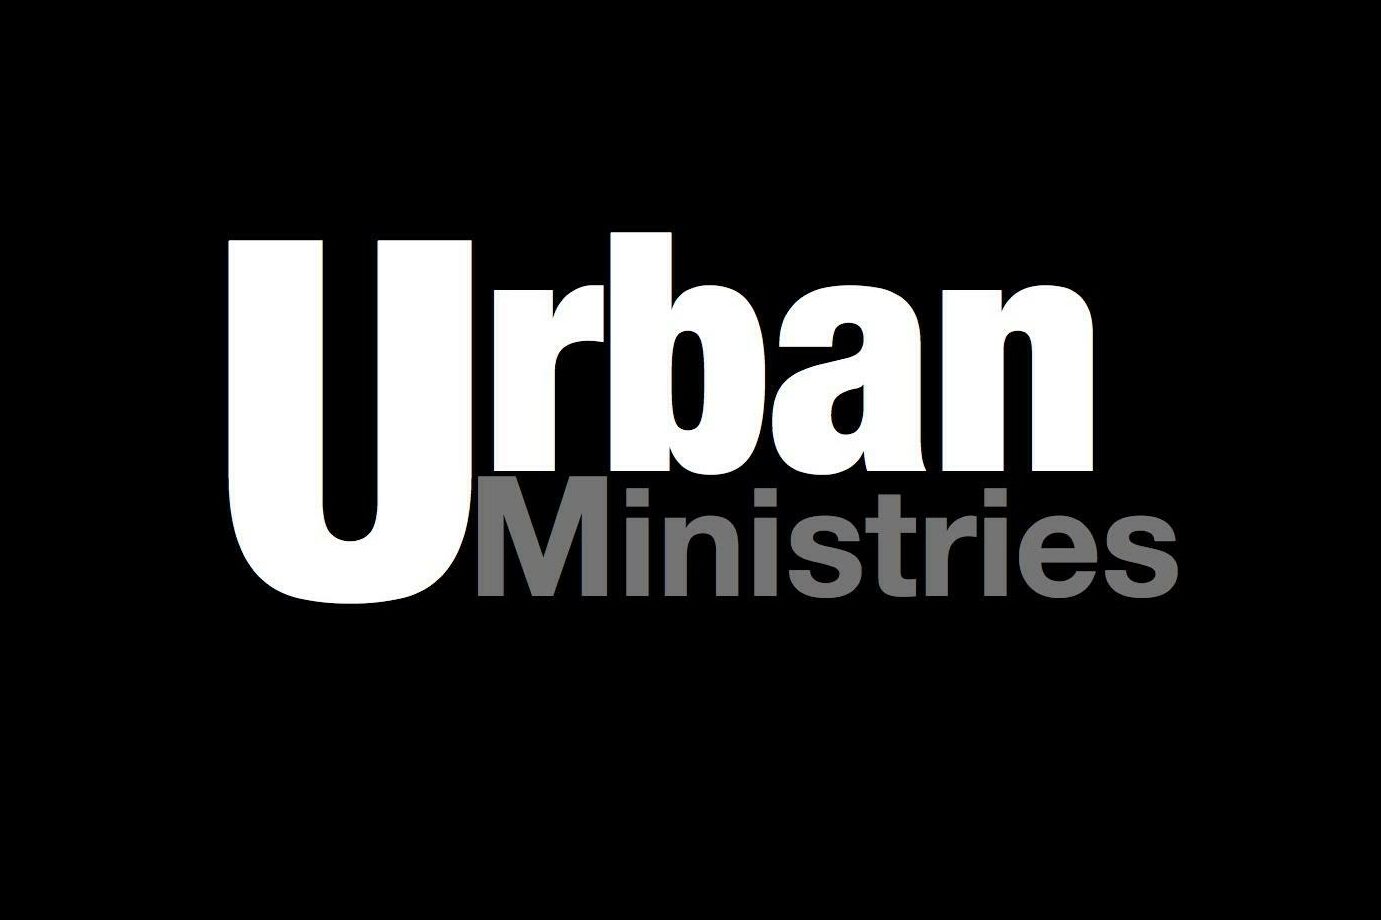 Urban Ministries – Two new online courses